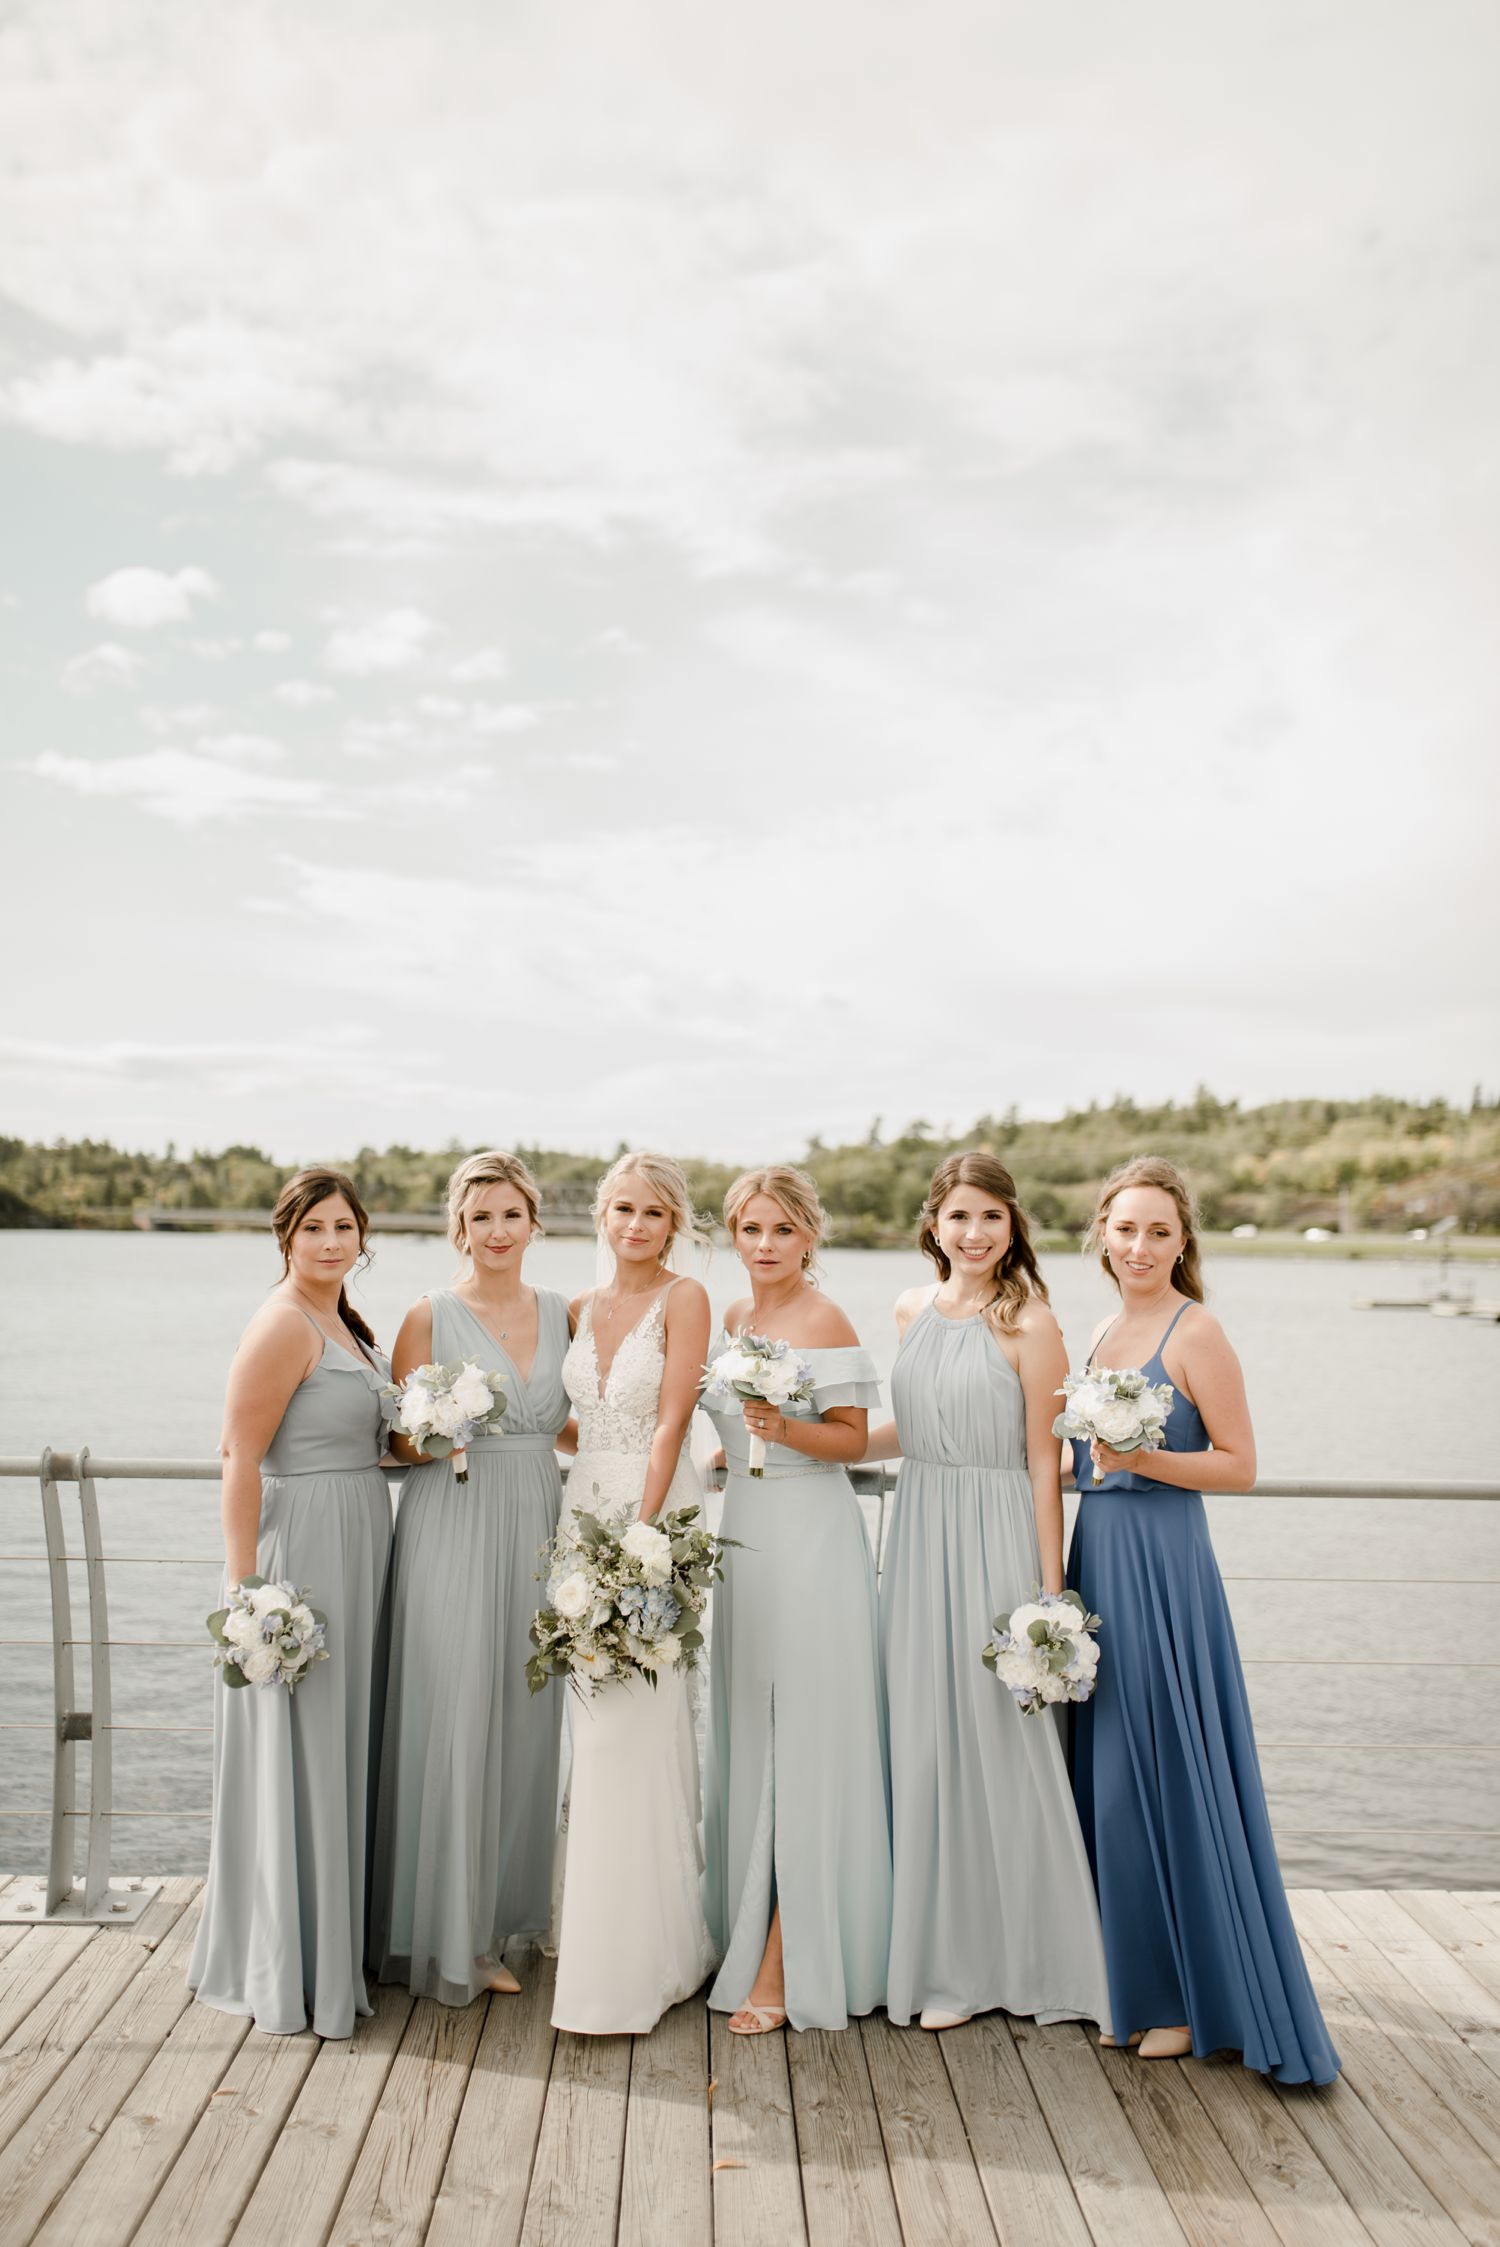 Kenora wedding, a fall wedding in Ontario, photographed by Vanessa Renae Photography, a Winnipeg and Kenora wedding photographer Blue bridesmaid dresses